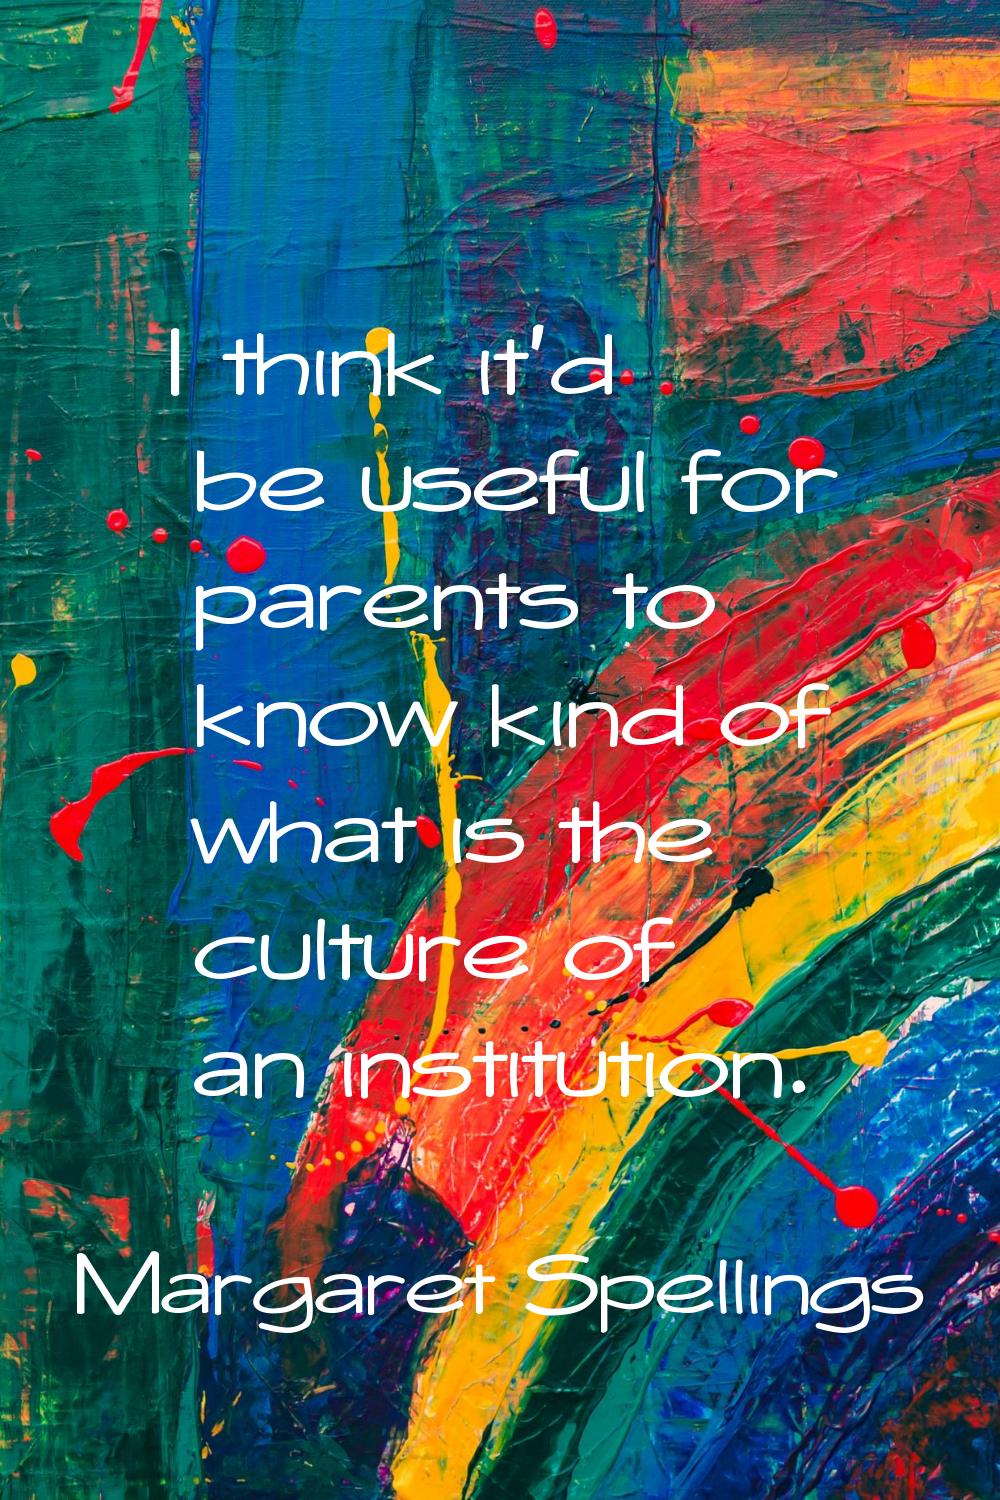 I think it'd be useful for parents to know kind of what is the culture of an institution.